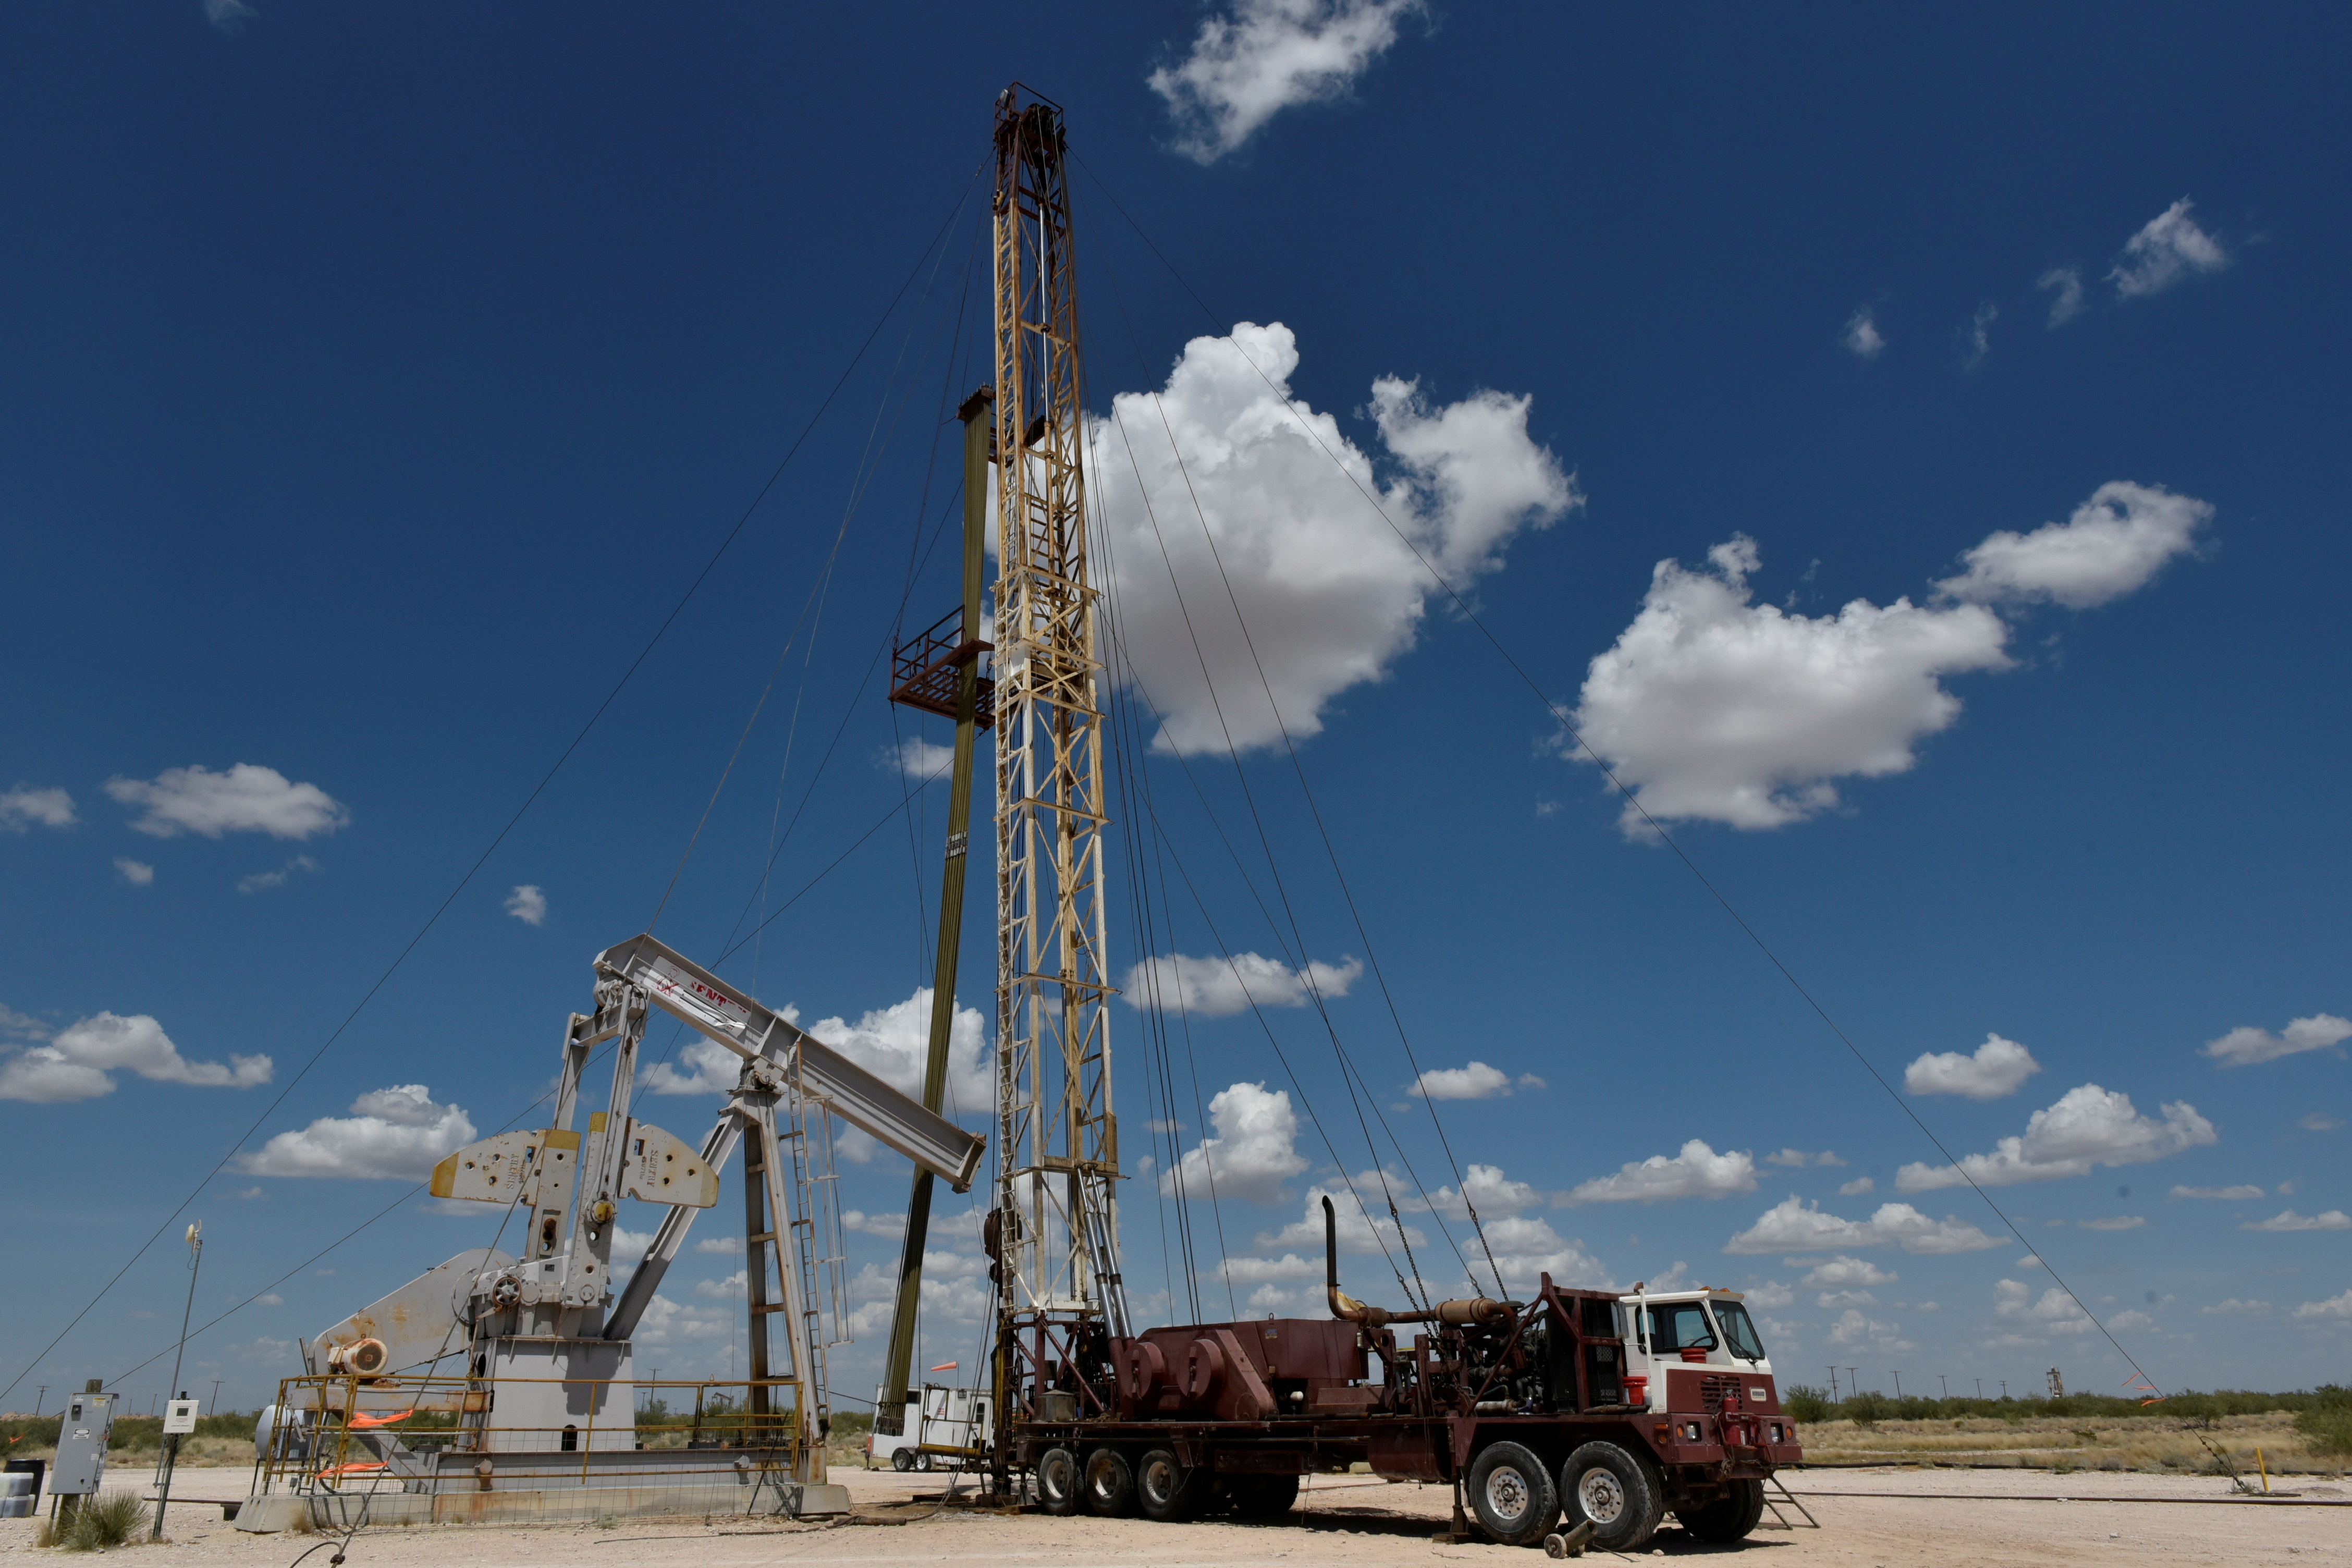 A work-over rig performs maintenance on an oil well in the Permian Basin oil production area near Wink, Texas U.S. August 22, 2018. Picture taken August 22, 2018. REUTERS/Nick Oxford/File Photo/File Photo